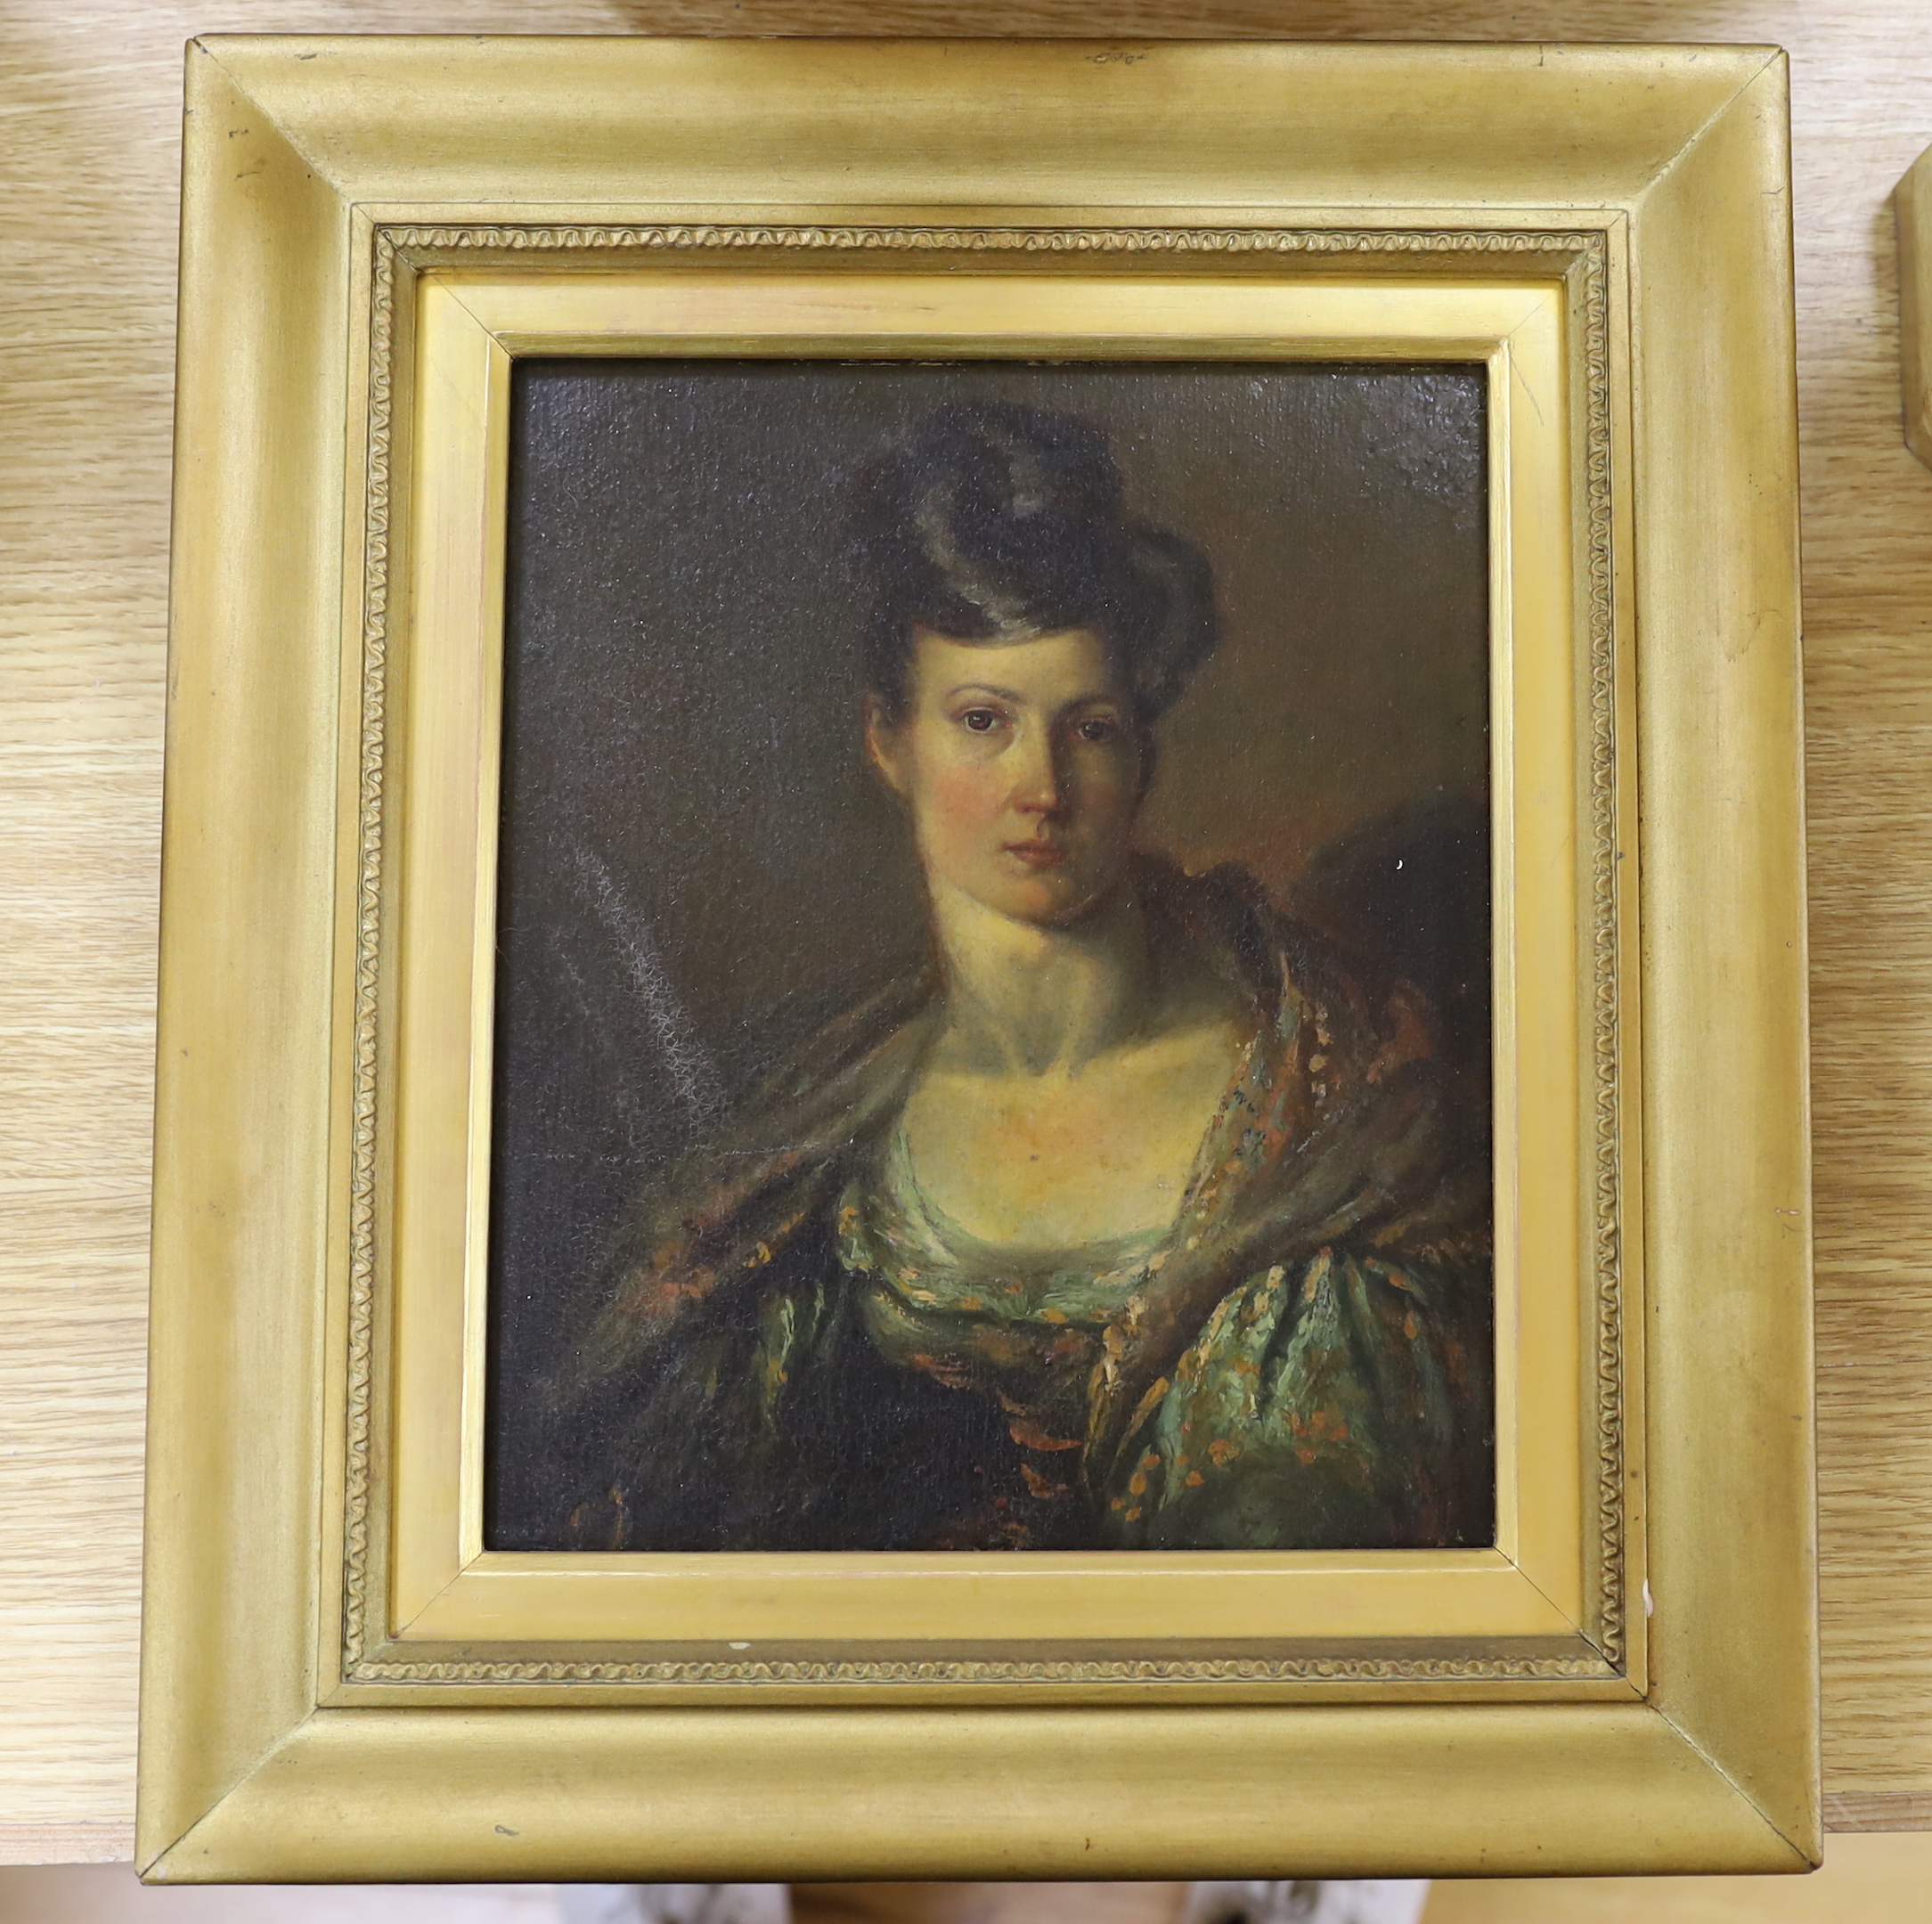 19th century English School, oil on panel, Head and shoulders portrait of a lady, 26 x 22cm - Image 2 of 2